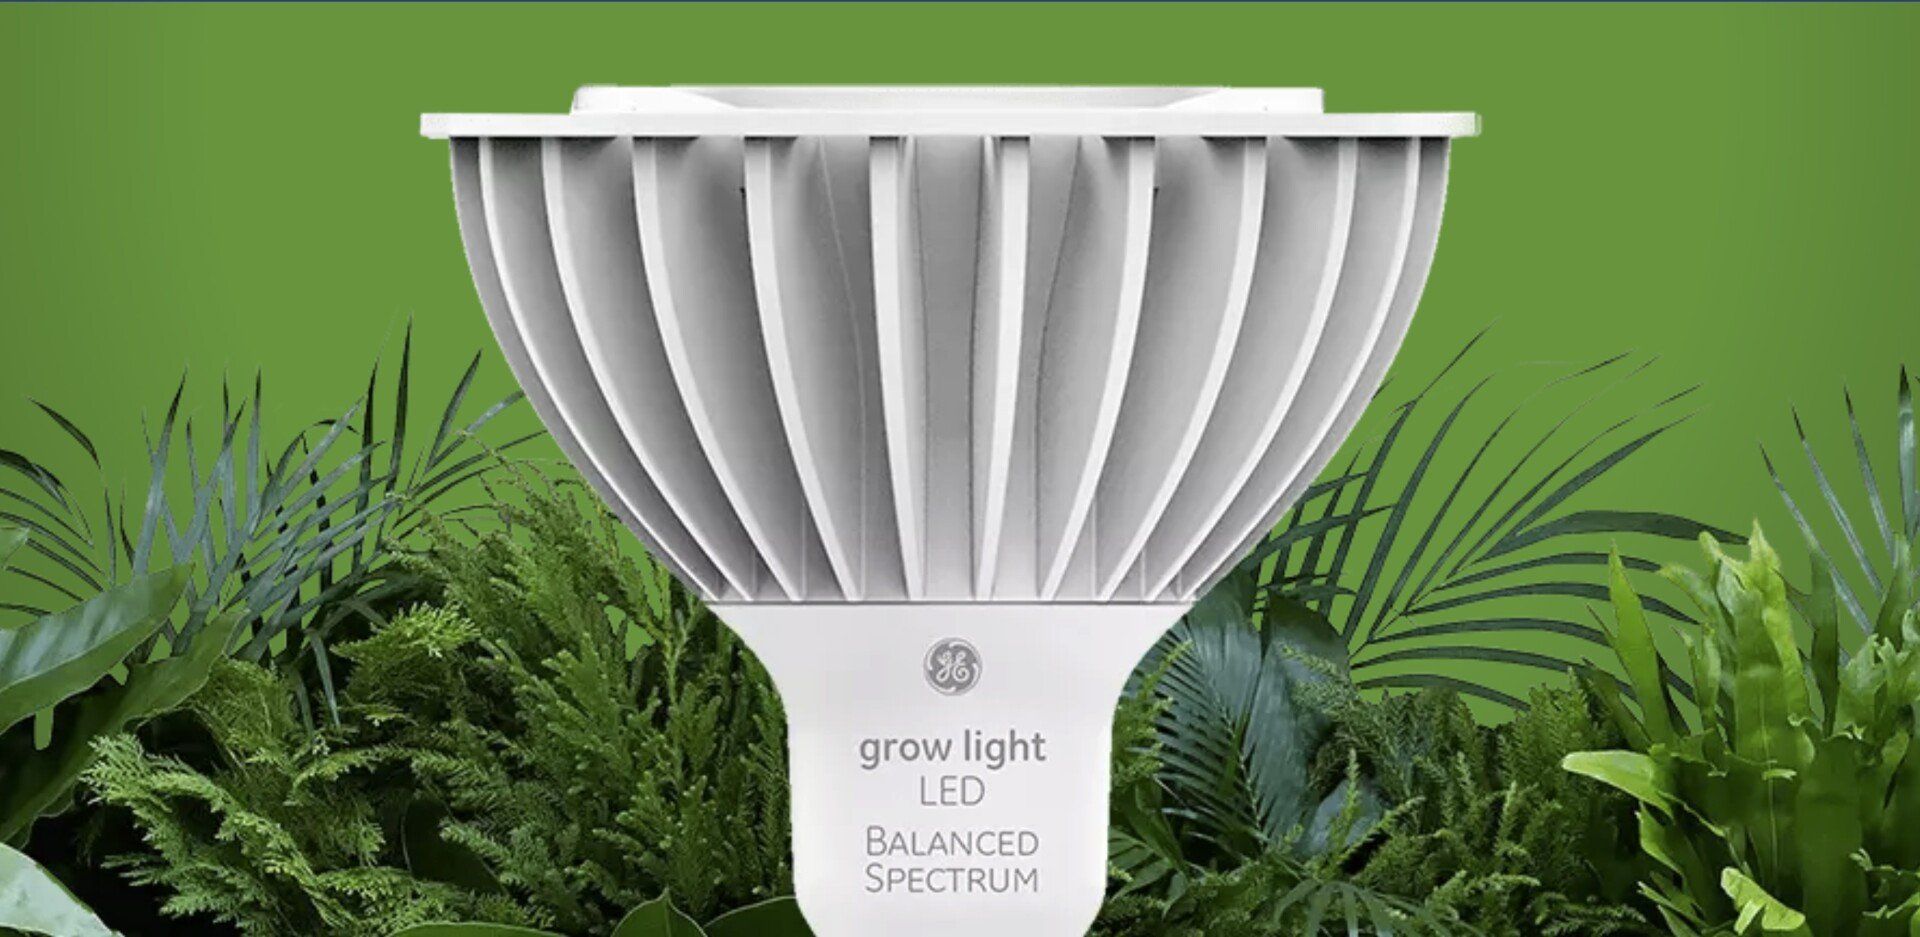 A white light bulb is sitting in front of a green background surrounded by plants.